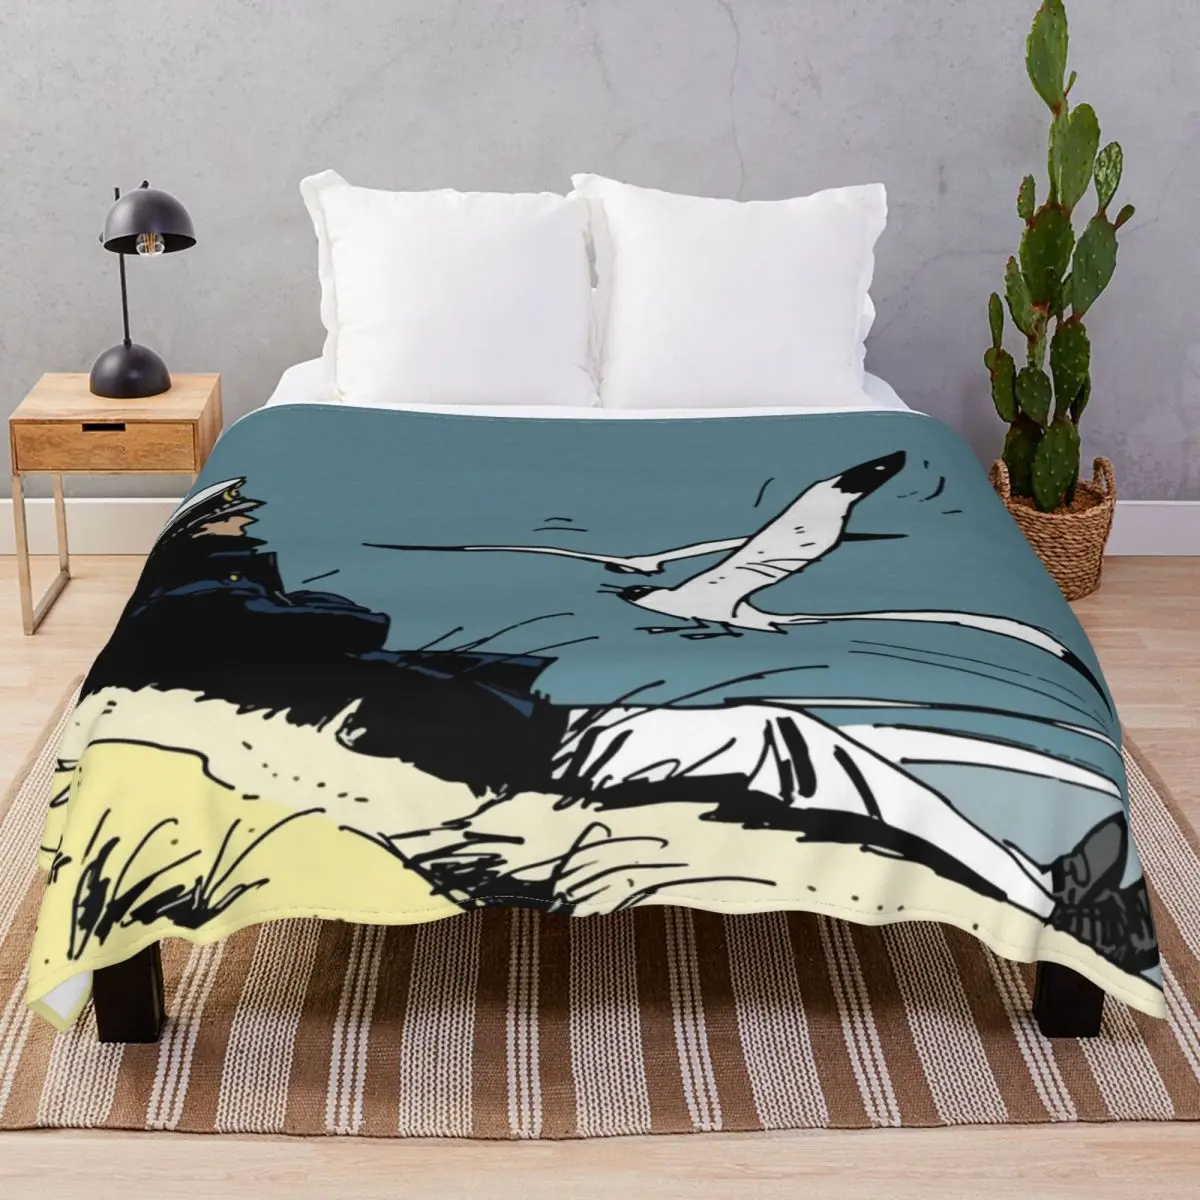 Corto Maltese On The Shore Blanket Coral Fleece Plush Decoration Portable Throw Blankets for Bedding Home Couch Camp Office